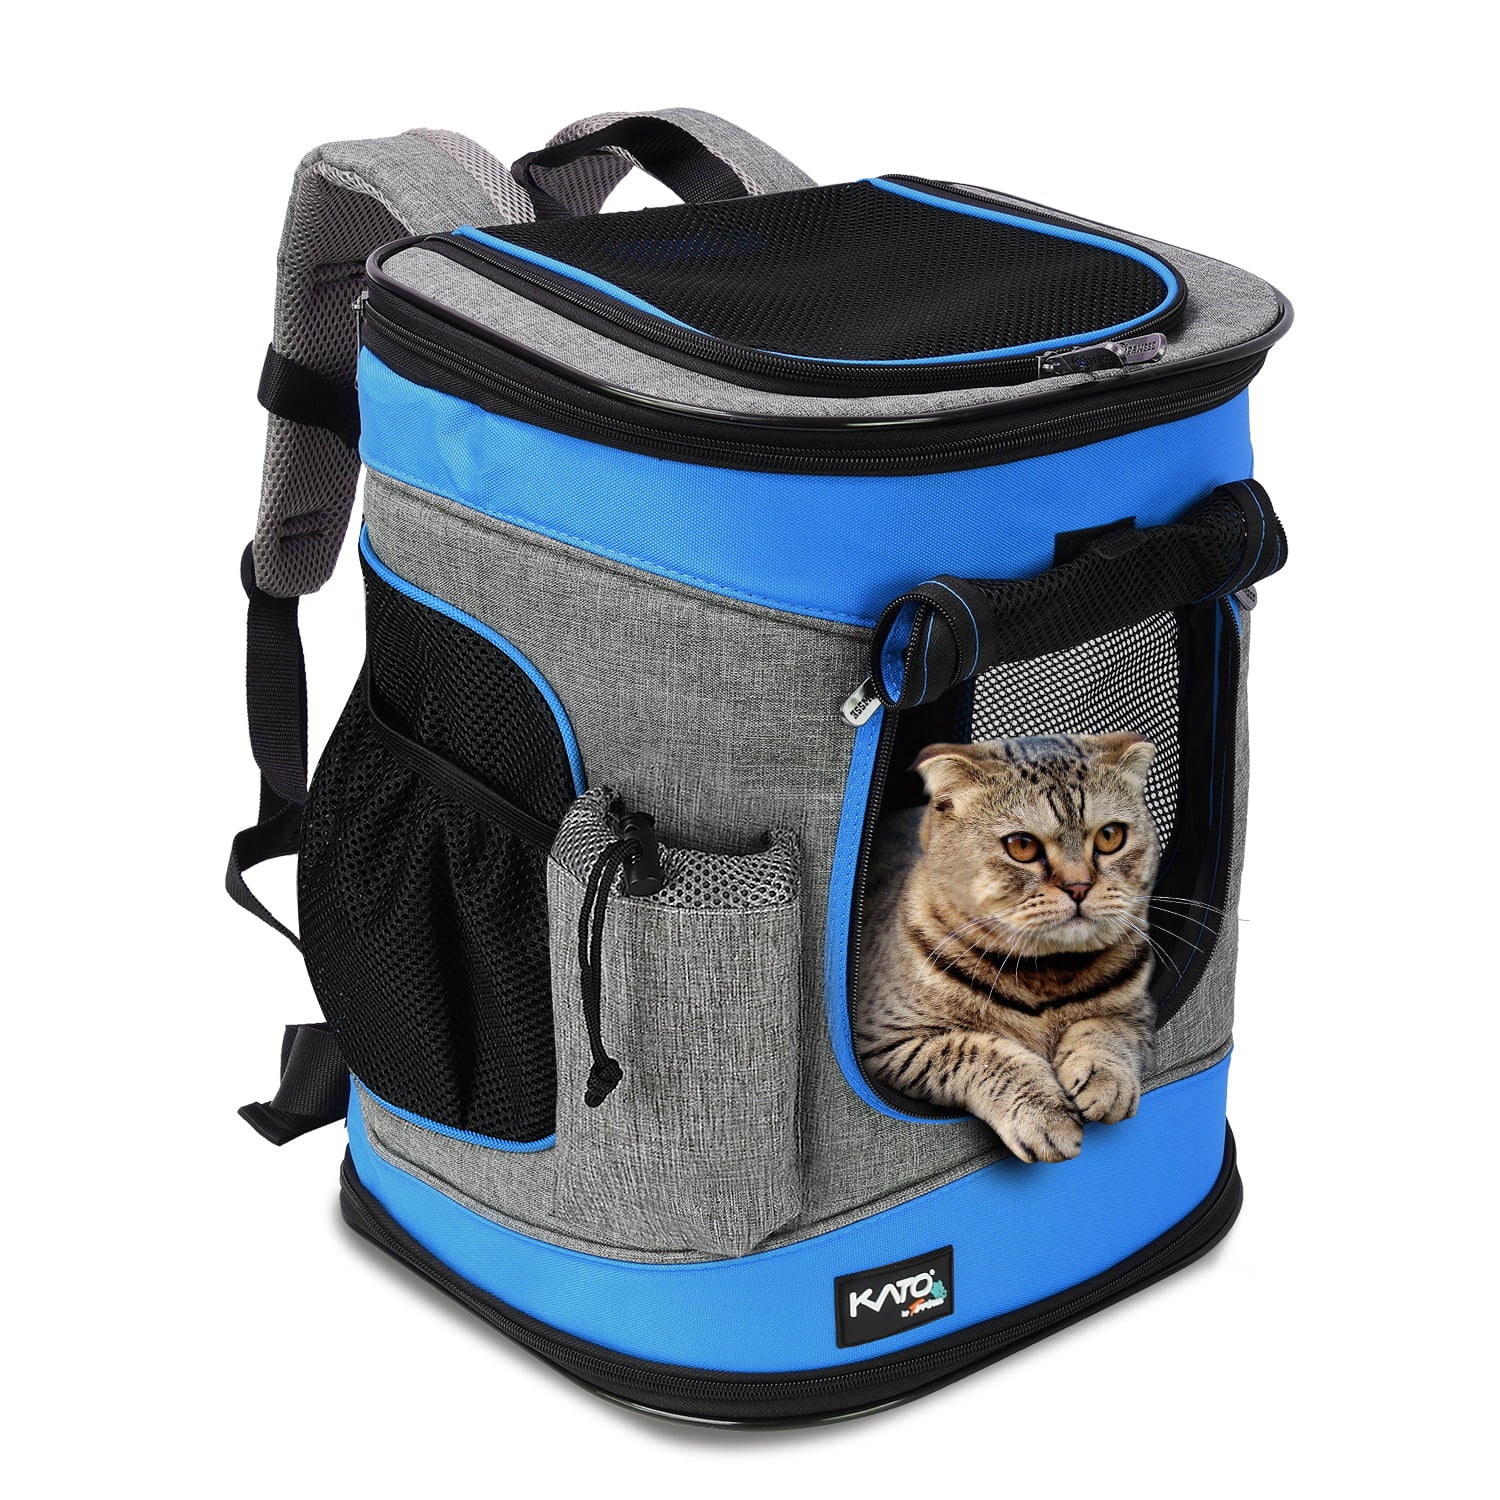 Tirrinia Pet Carrier Backpack for Dogs and Cats up to 15 LBS Comfort Dog Cat Carrier Travel Bag Breathable for Hiking， Walking， Cycling and Outdoor Use 16